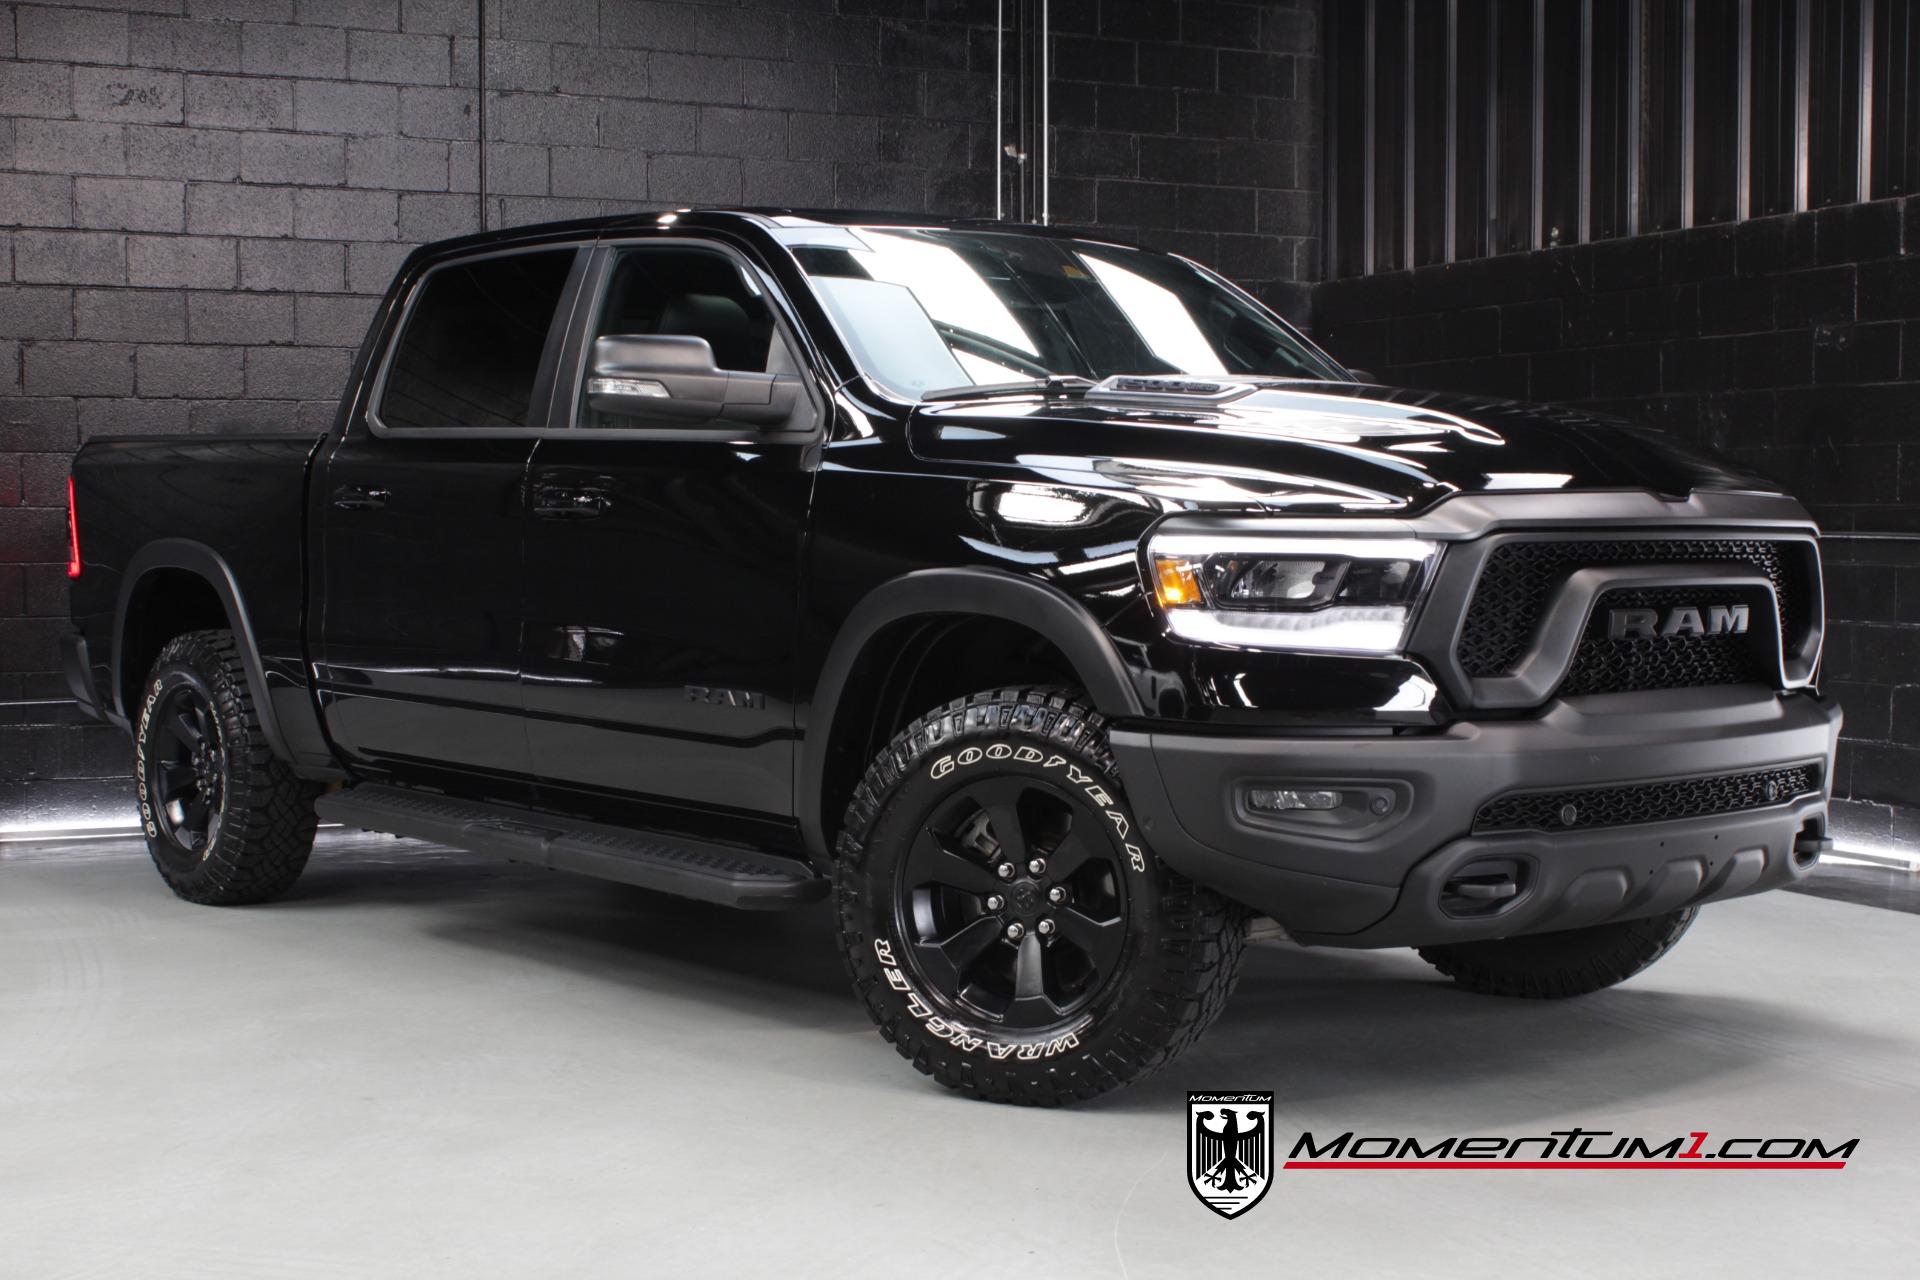 Used 2022 Ram 1500 Rebel Night Edition For Sale (Sold)